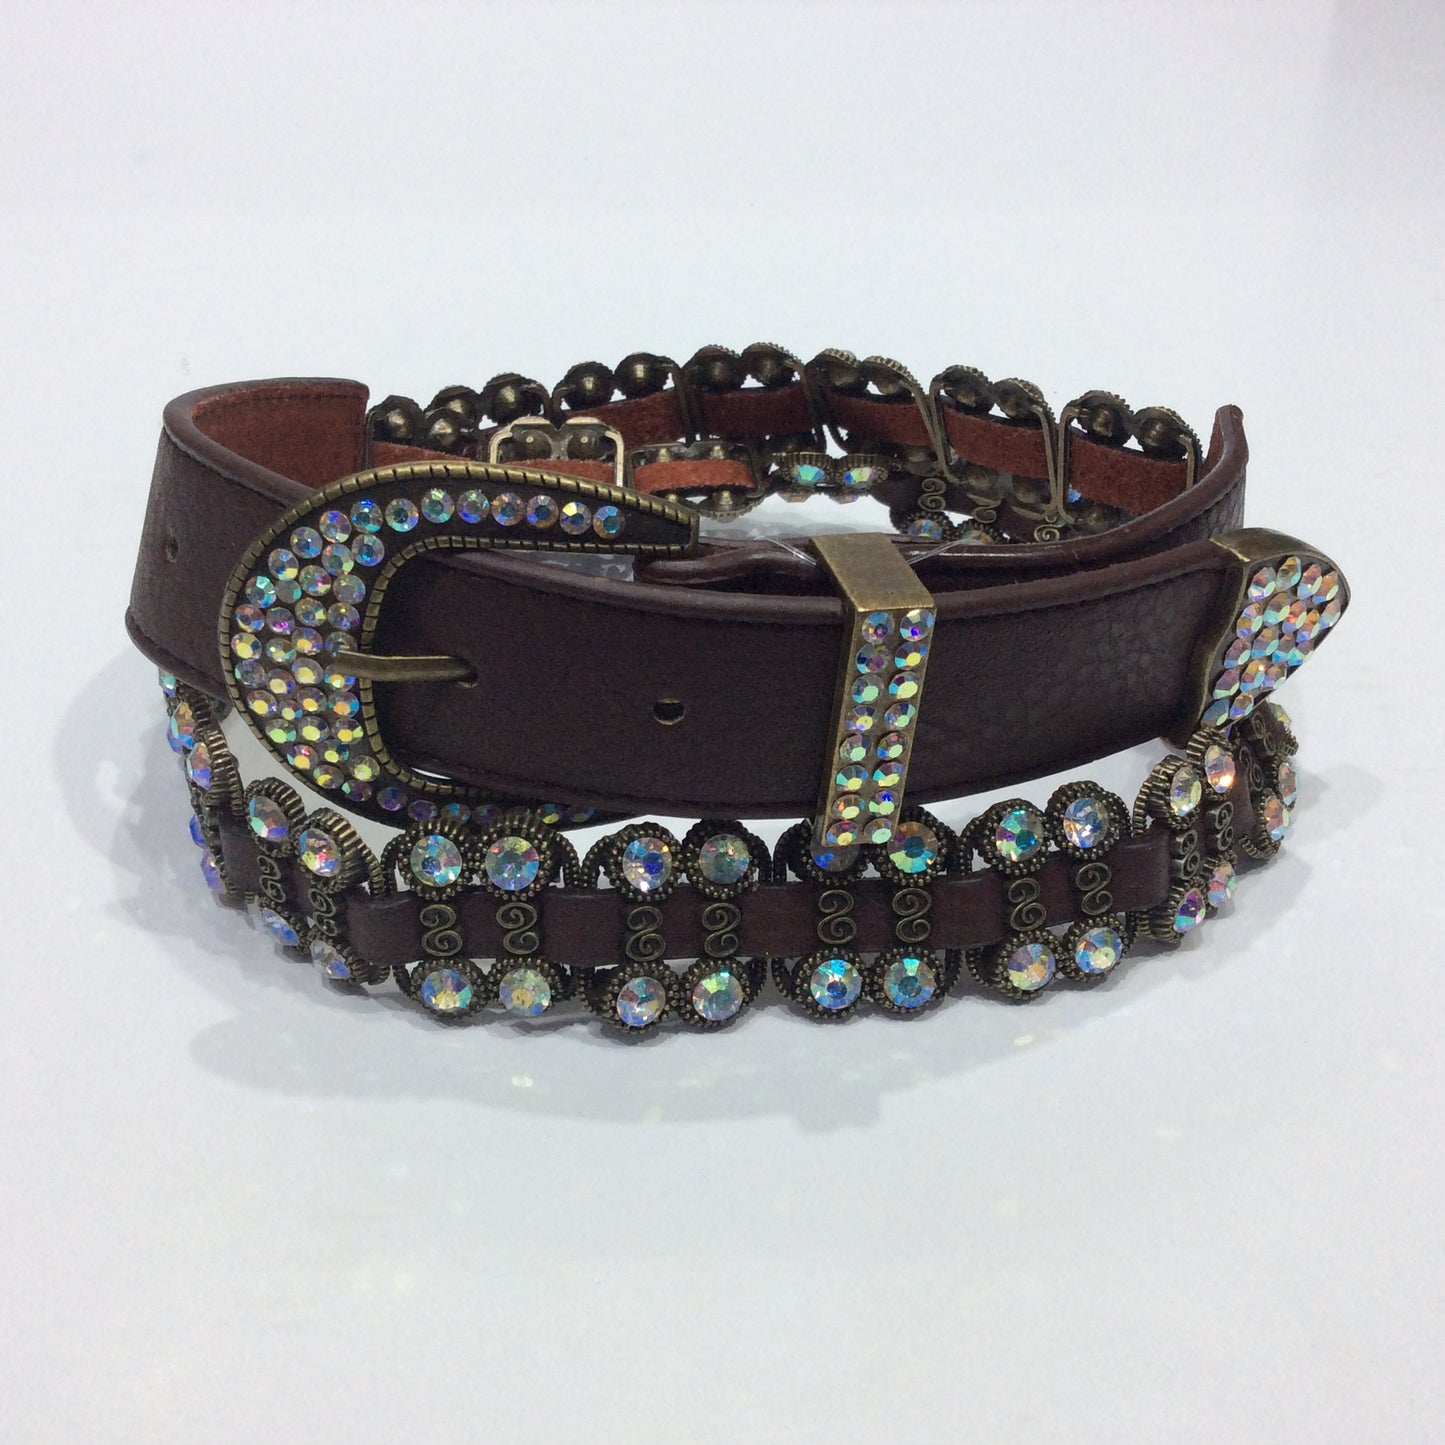 Belts-Wide Brown Leather with Crystal and Bronze Embellishments